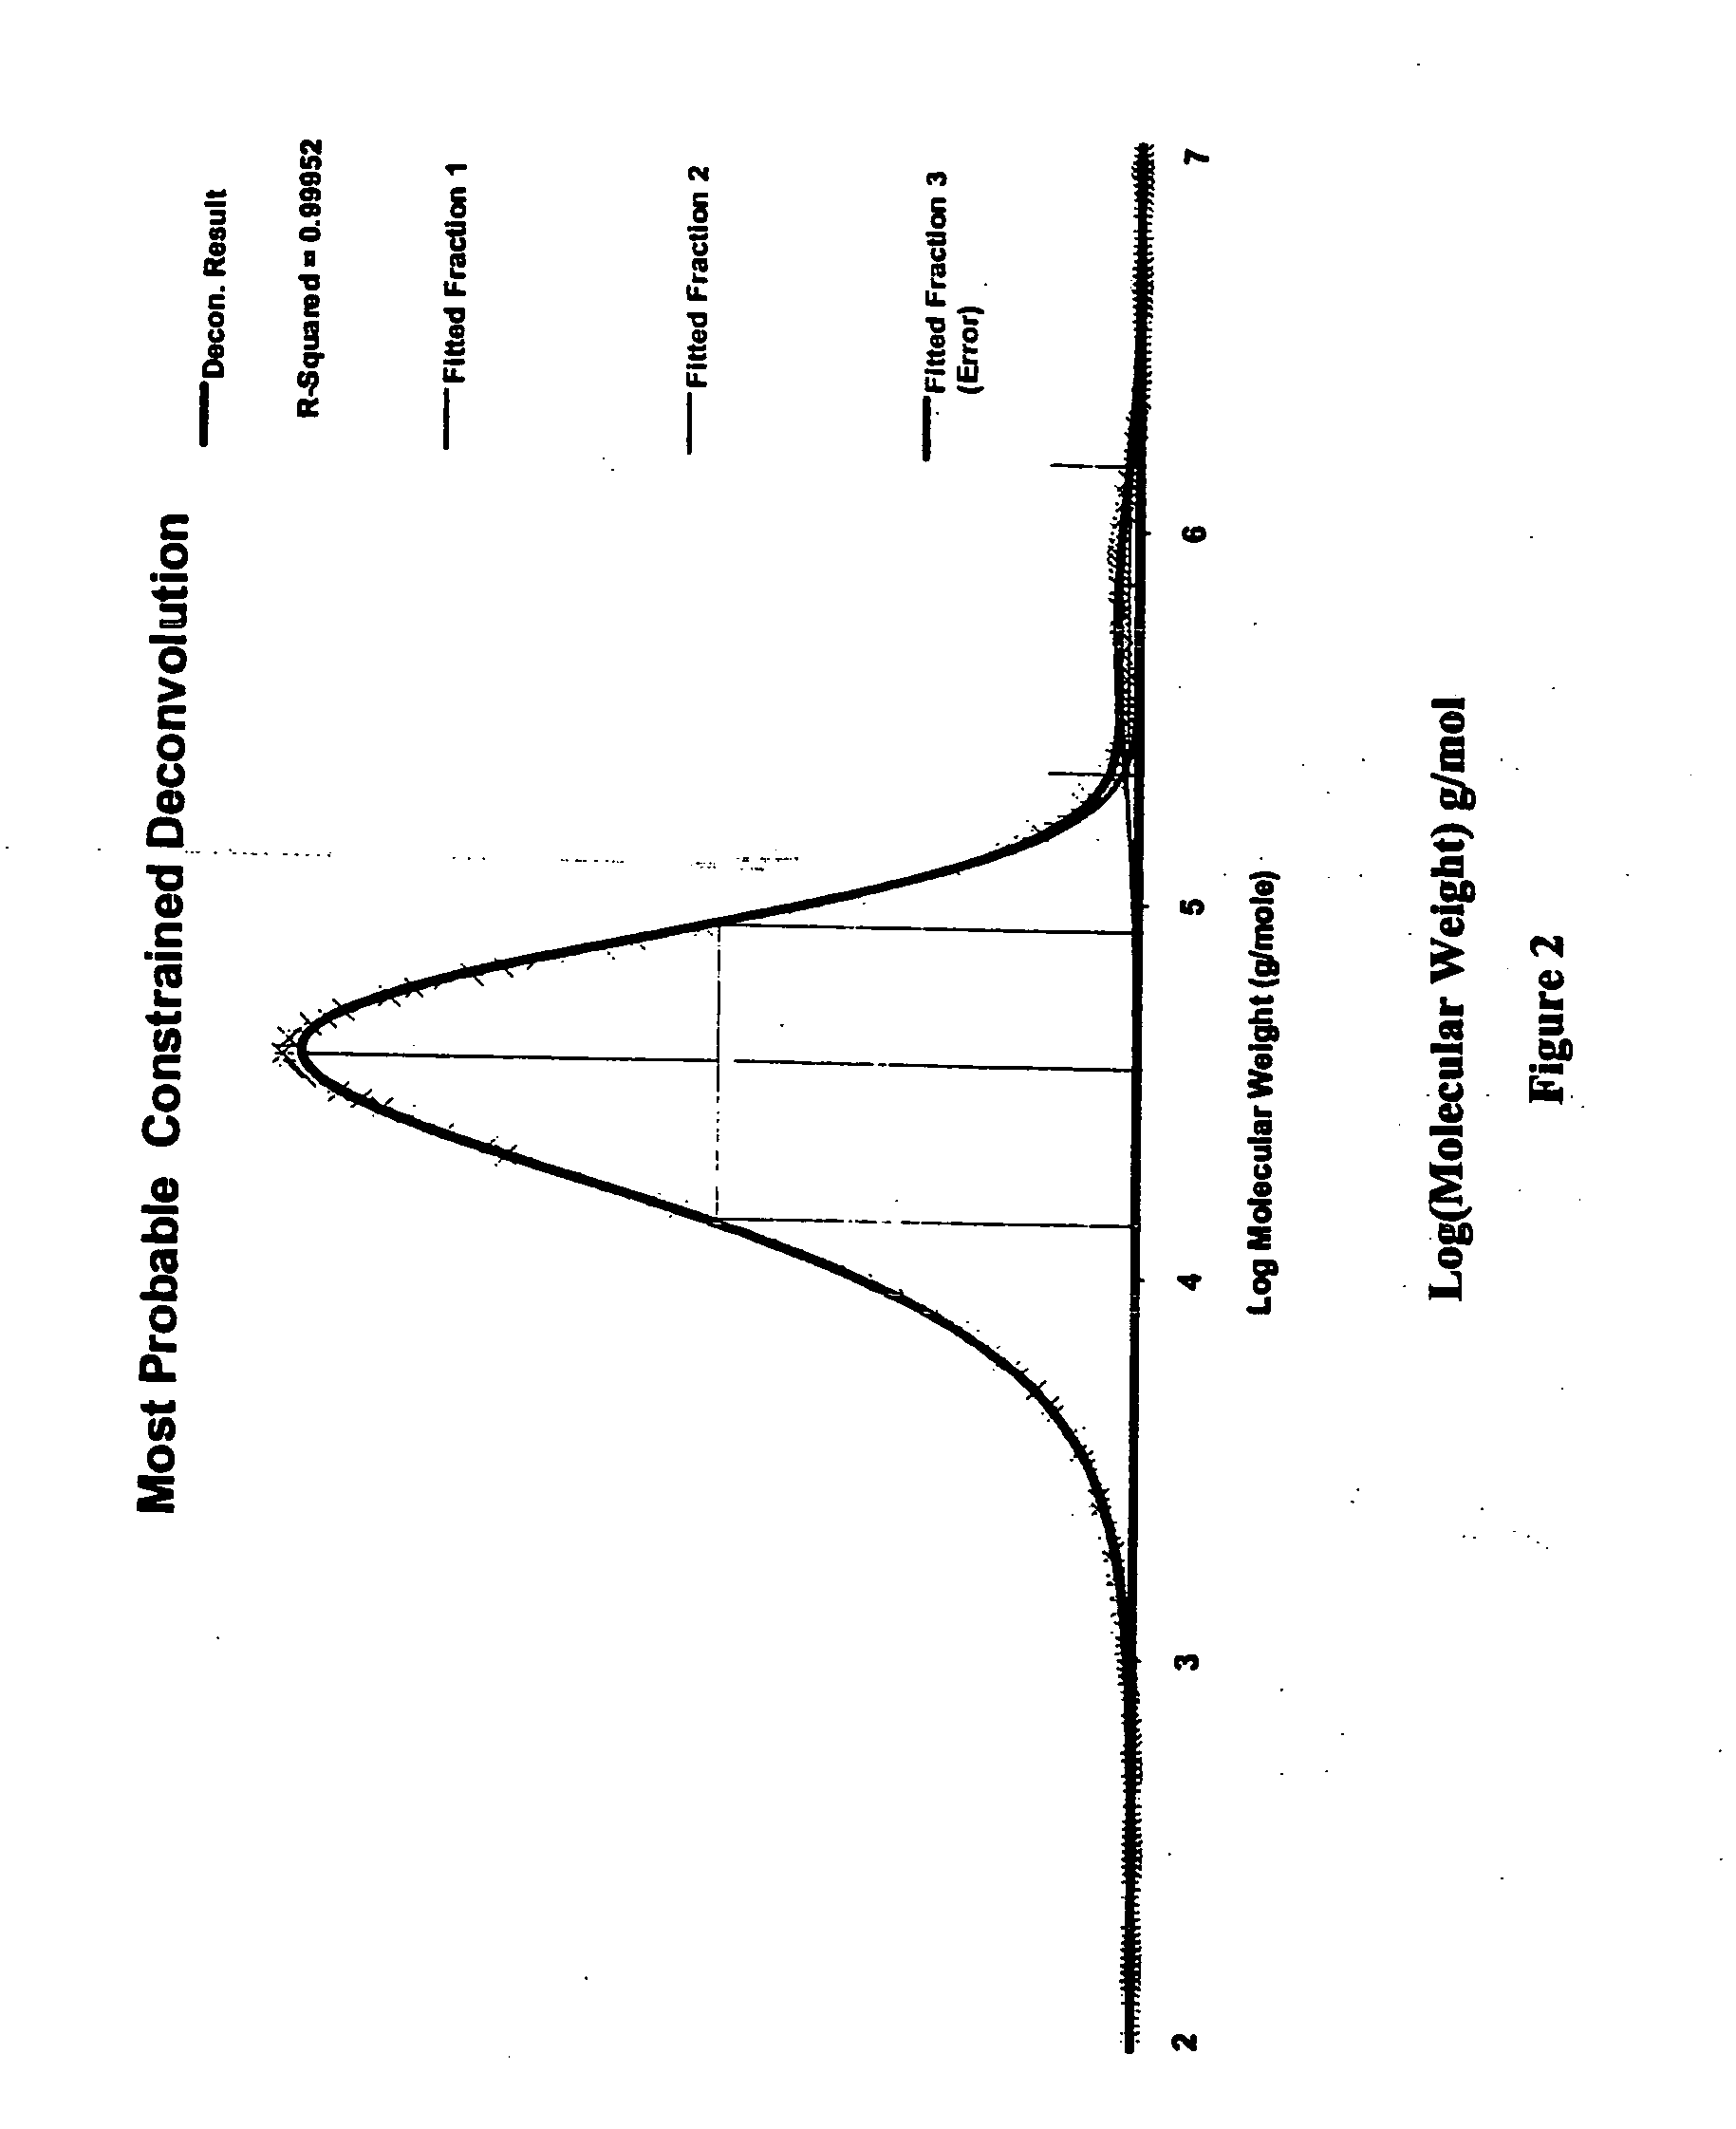 High melt strength polymers and method of making same